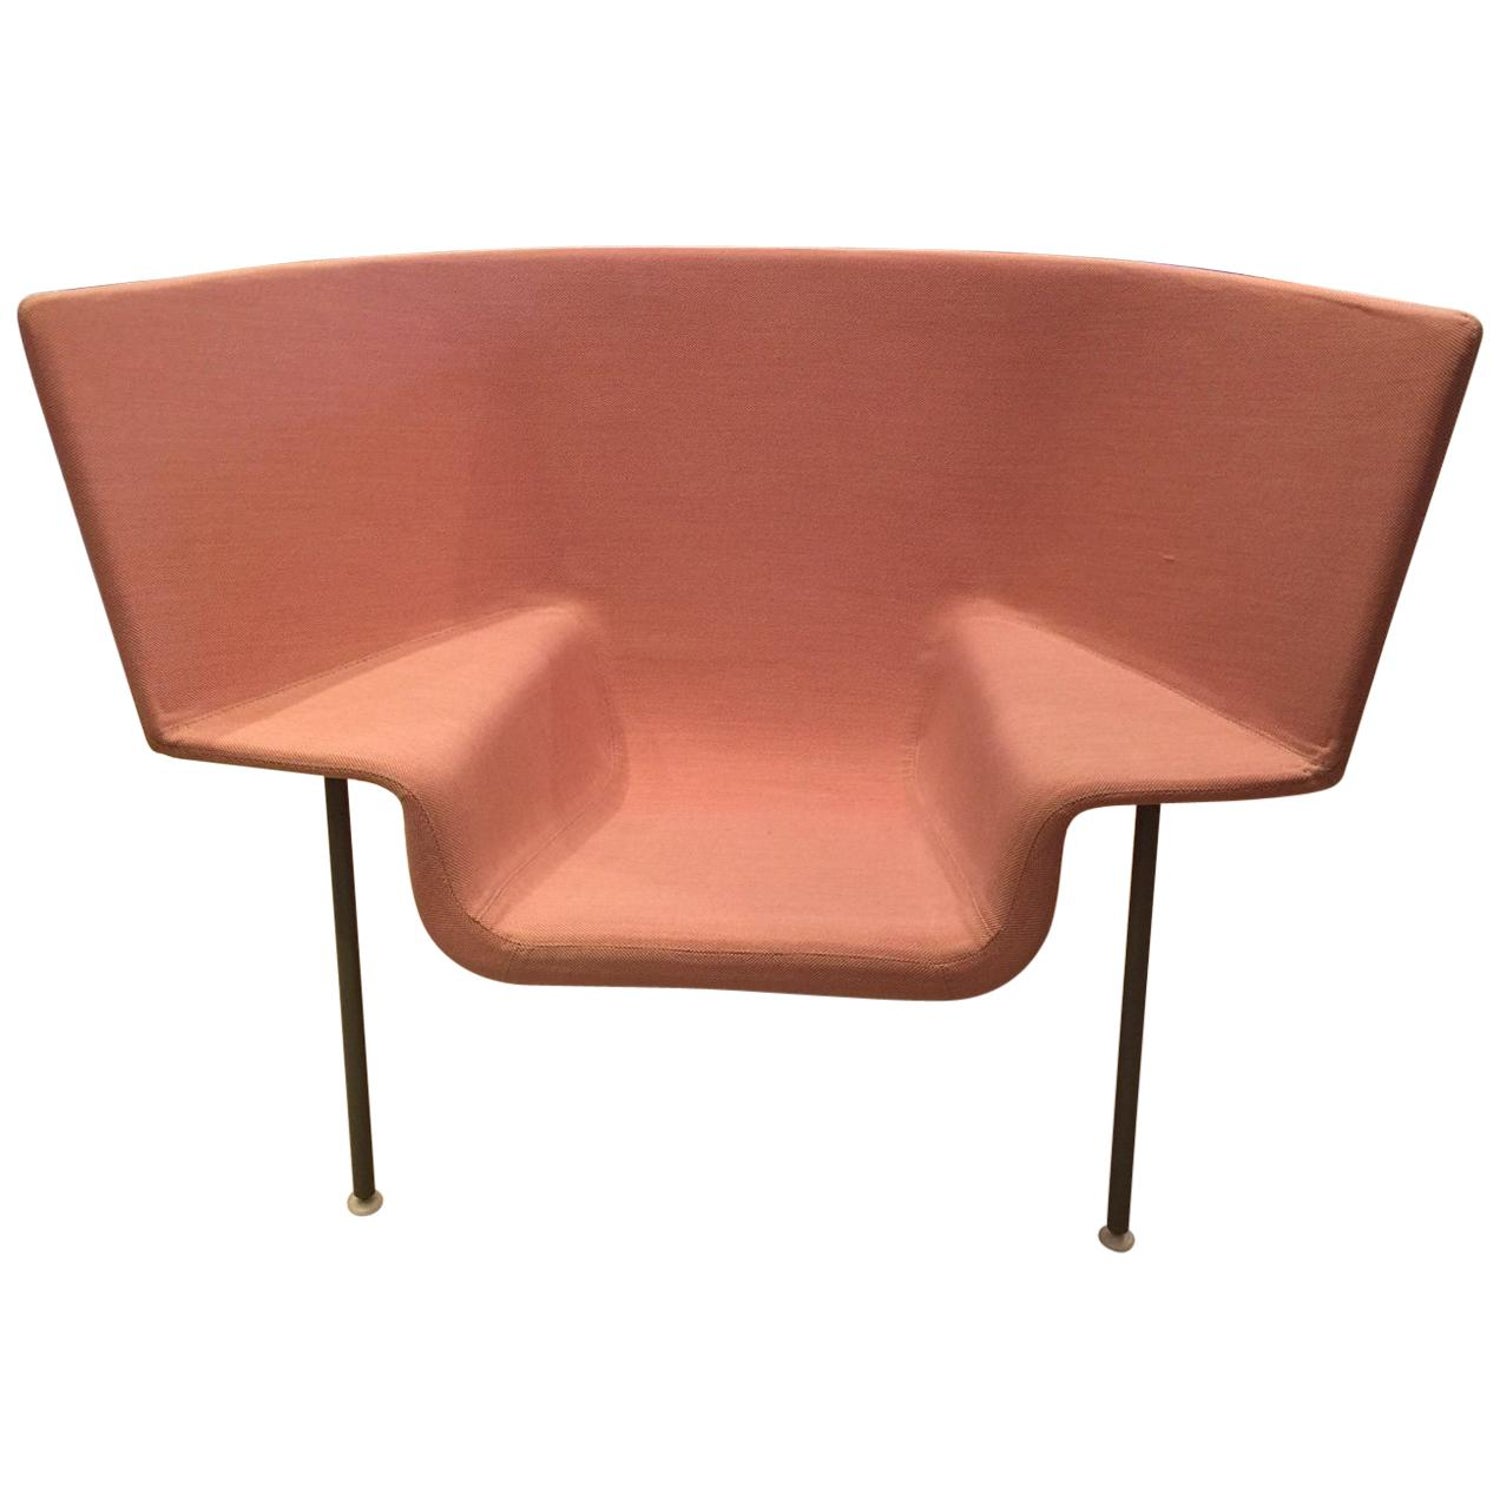 Doshi and Levien Cappellini "Capo" Lounge Chair For Sale at 1stDibs